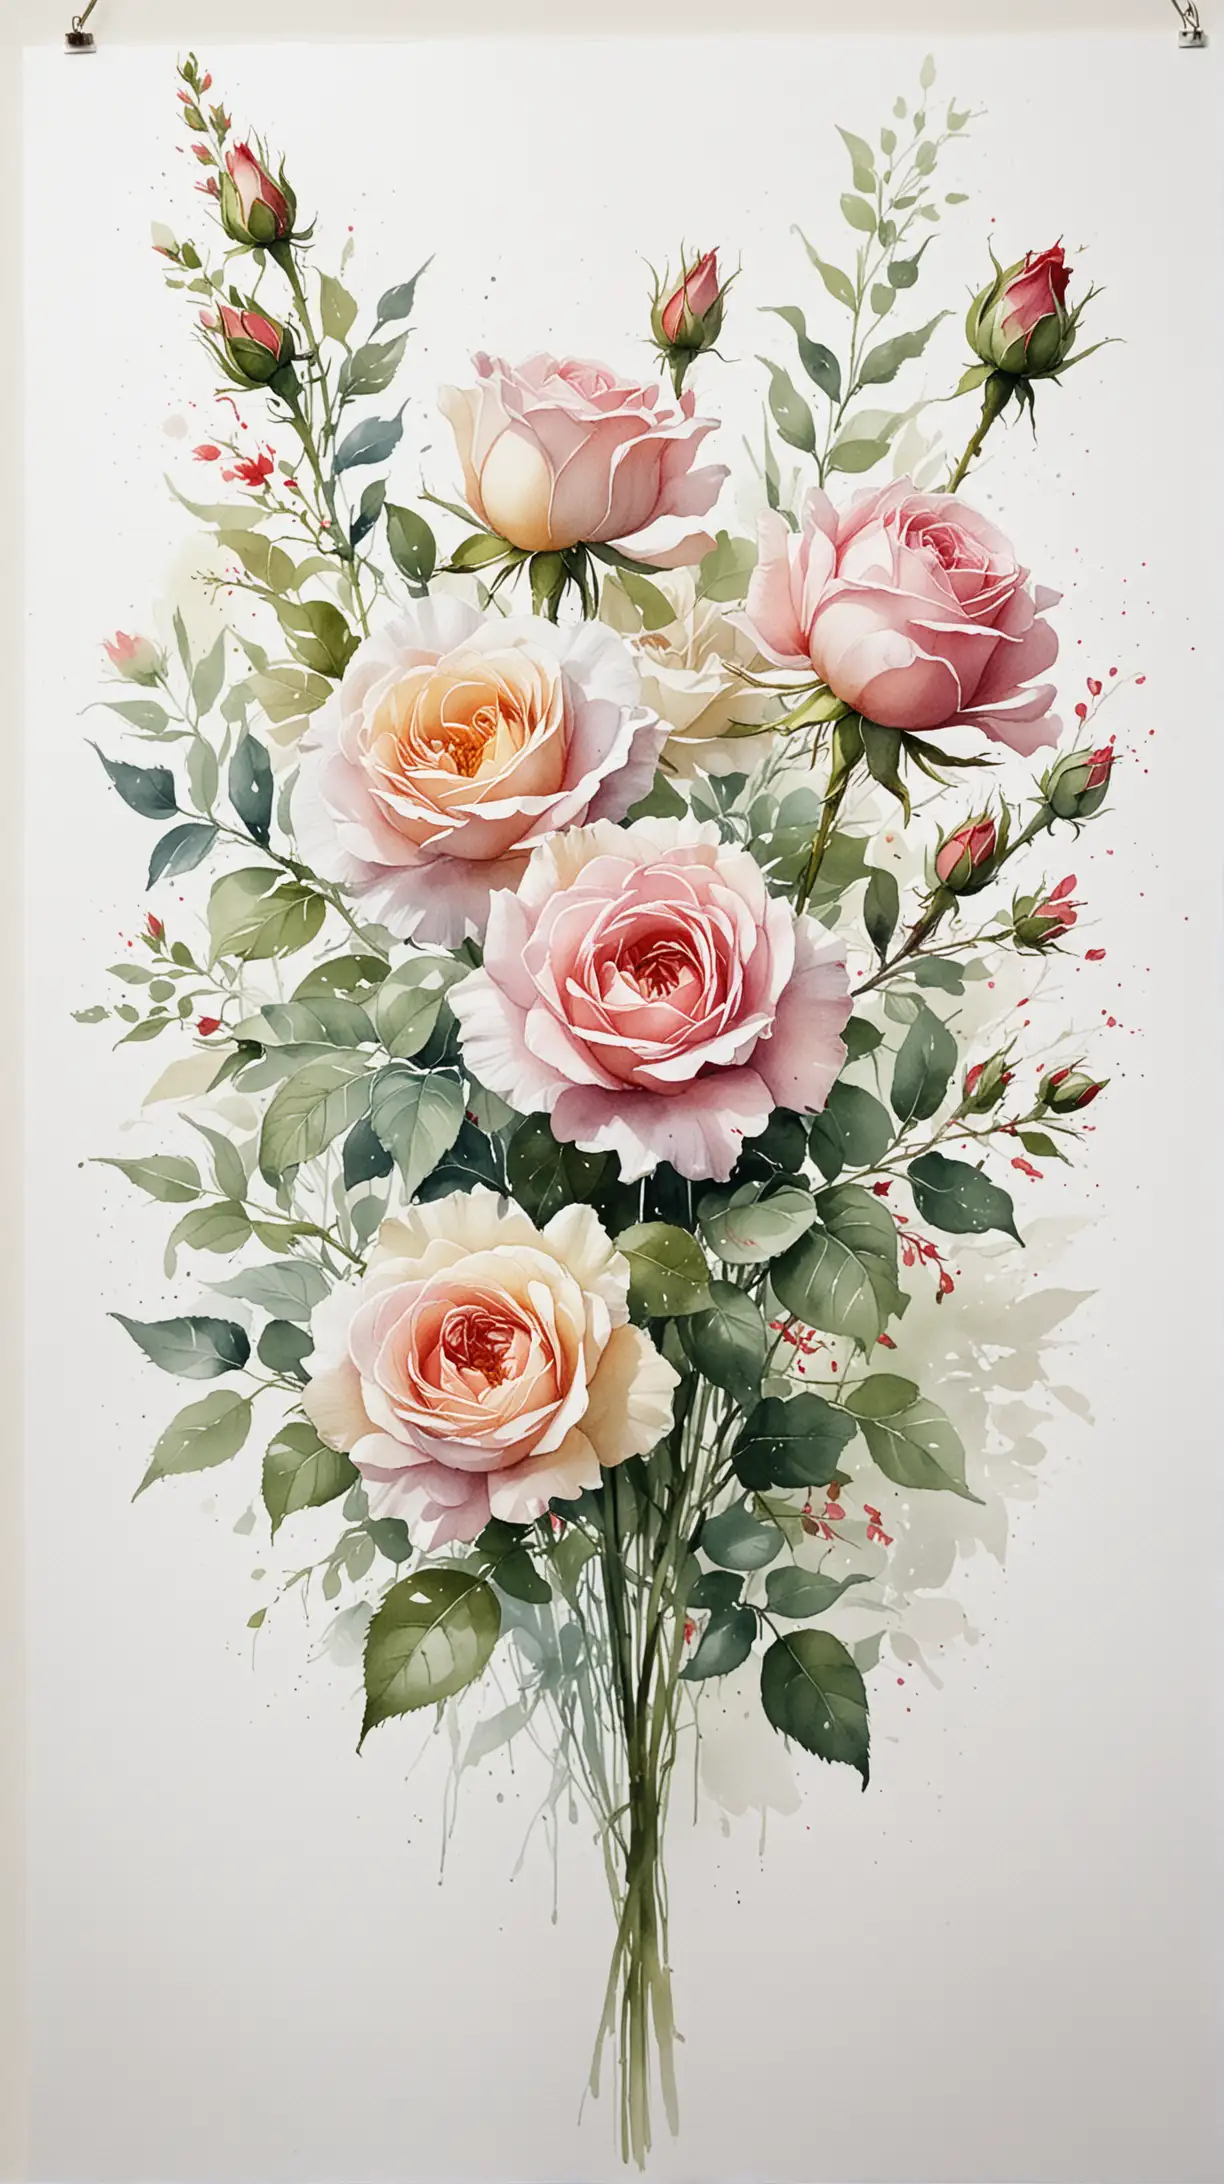 Watercolor Painting of Elegant Rose Bouquet on White Background